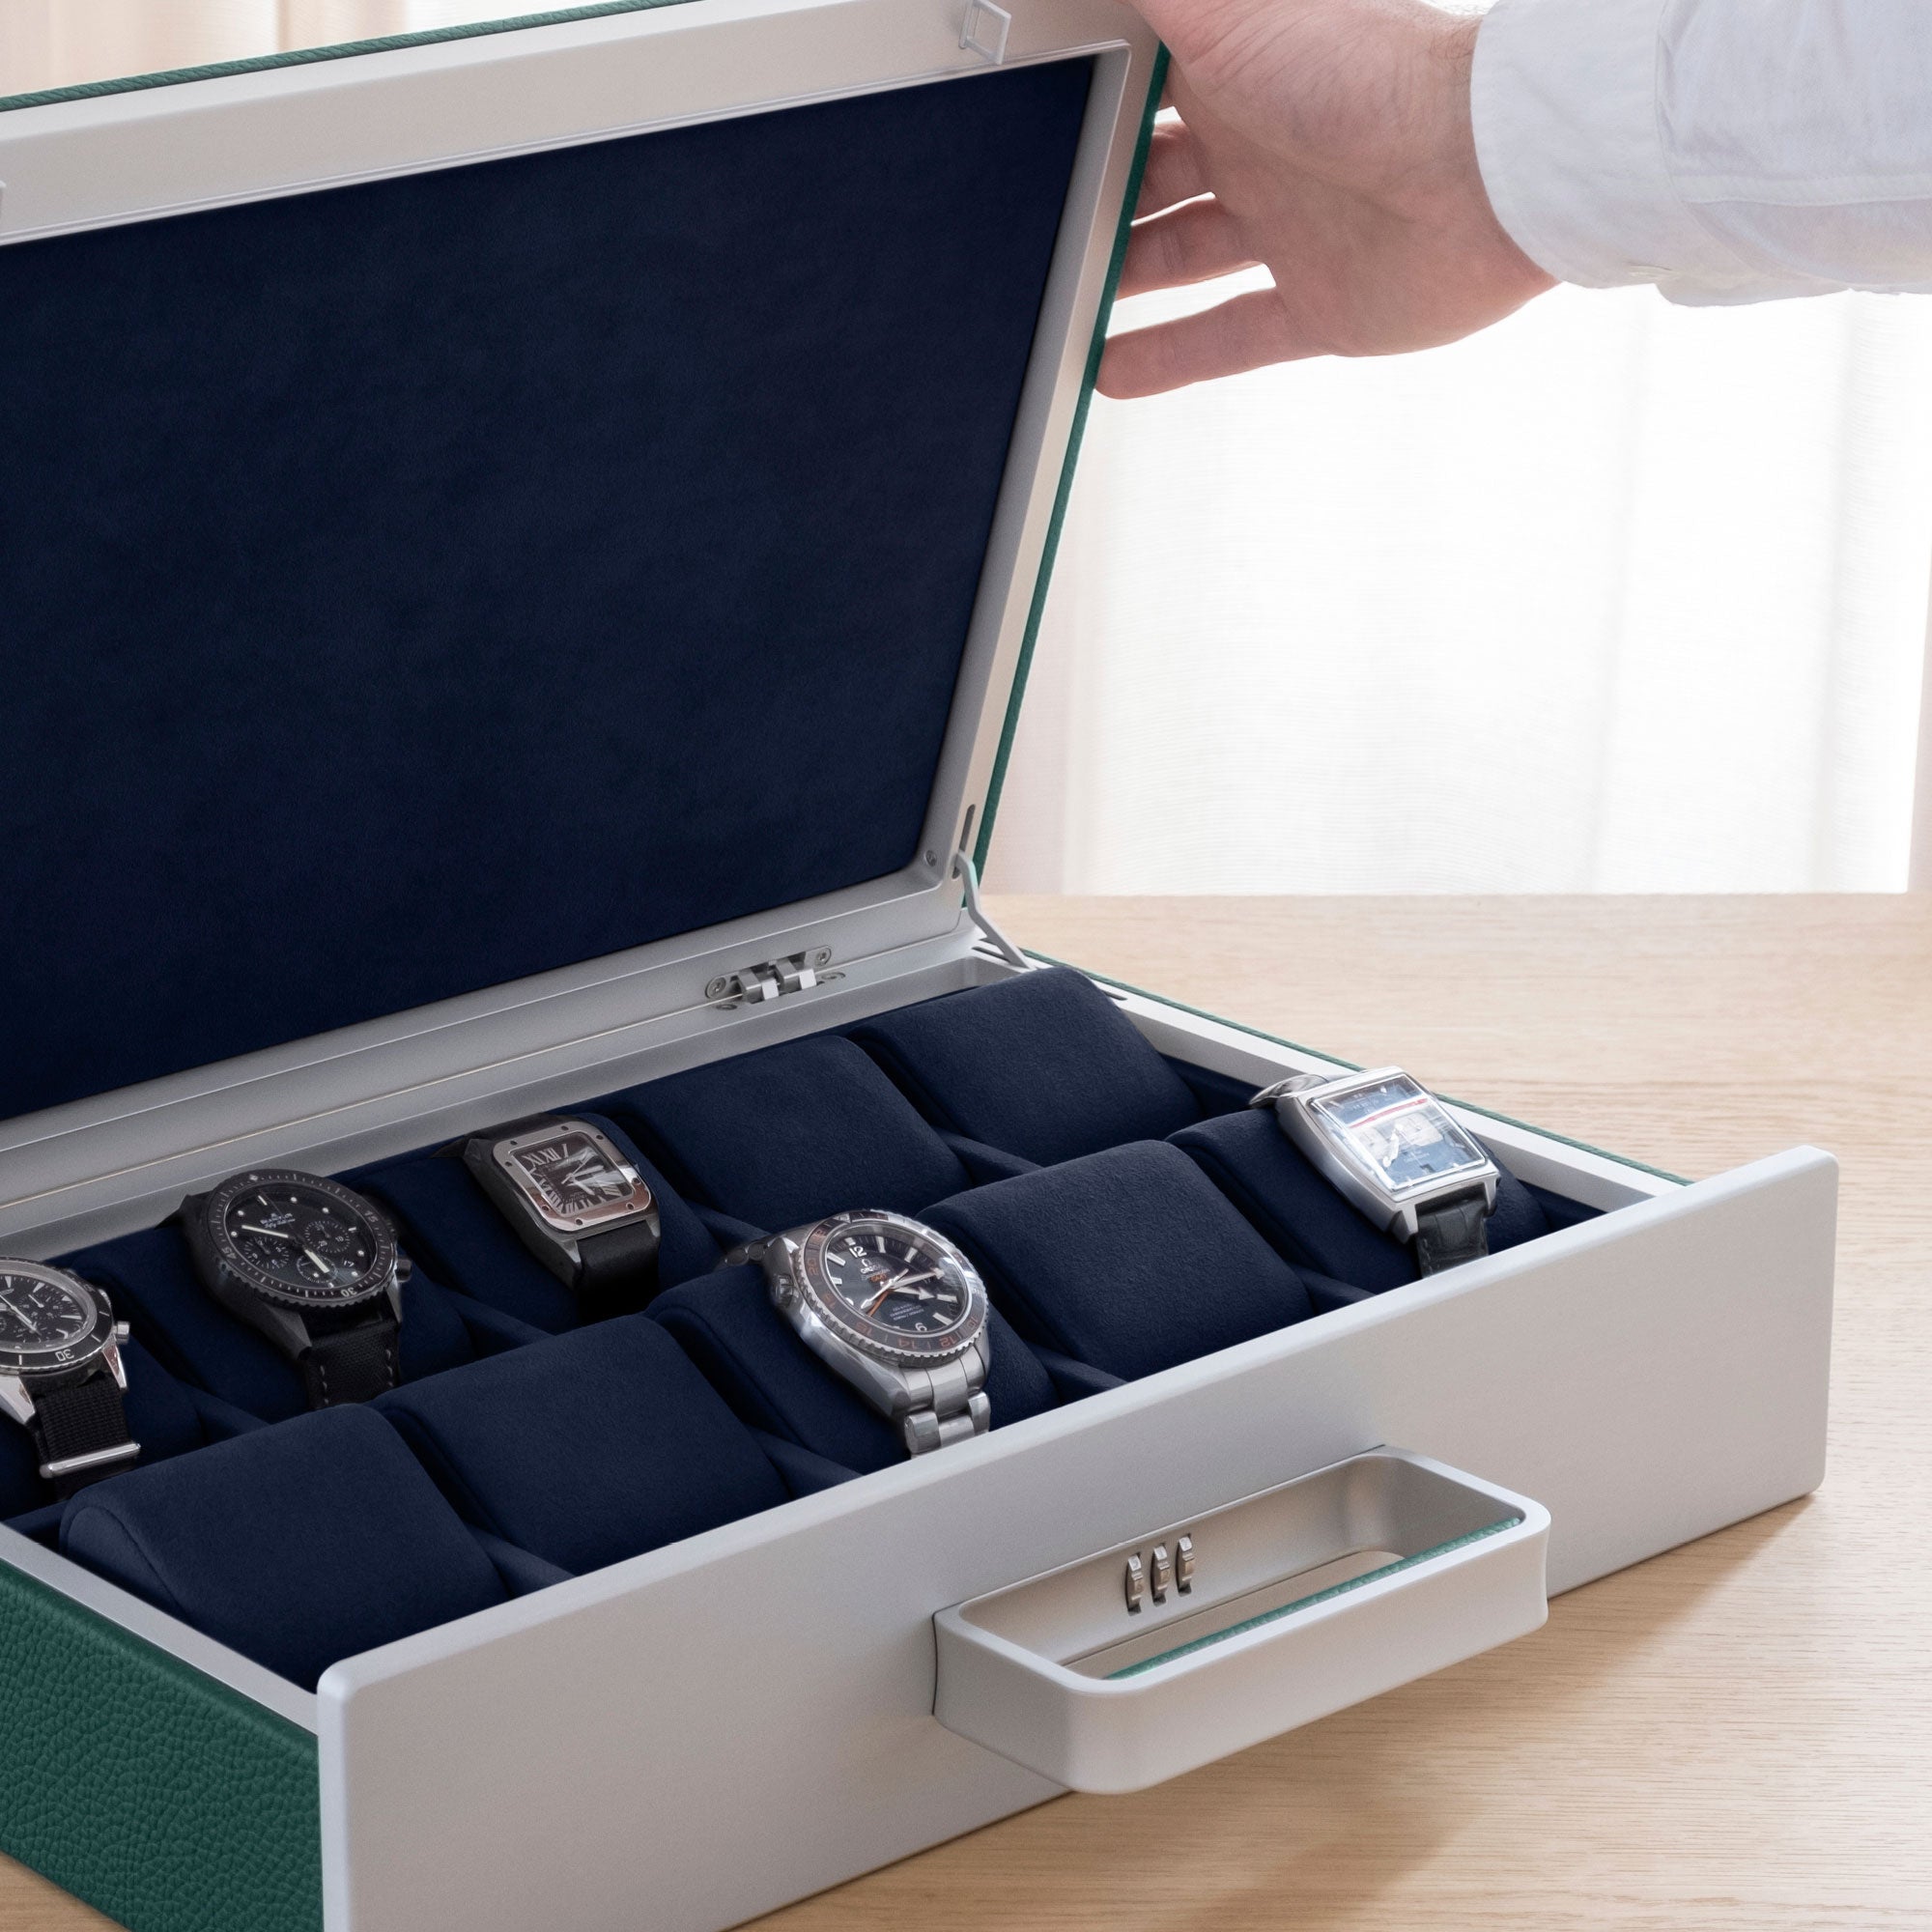 Lifestyle shot of Mackenzie Watch briefcase 10 filled with luxury watches including BlancPain, Cartier and Omega luxury watches